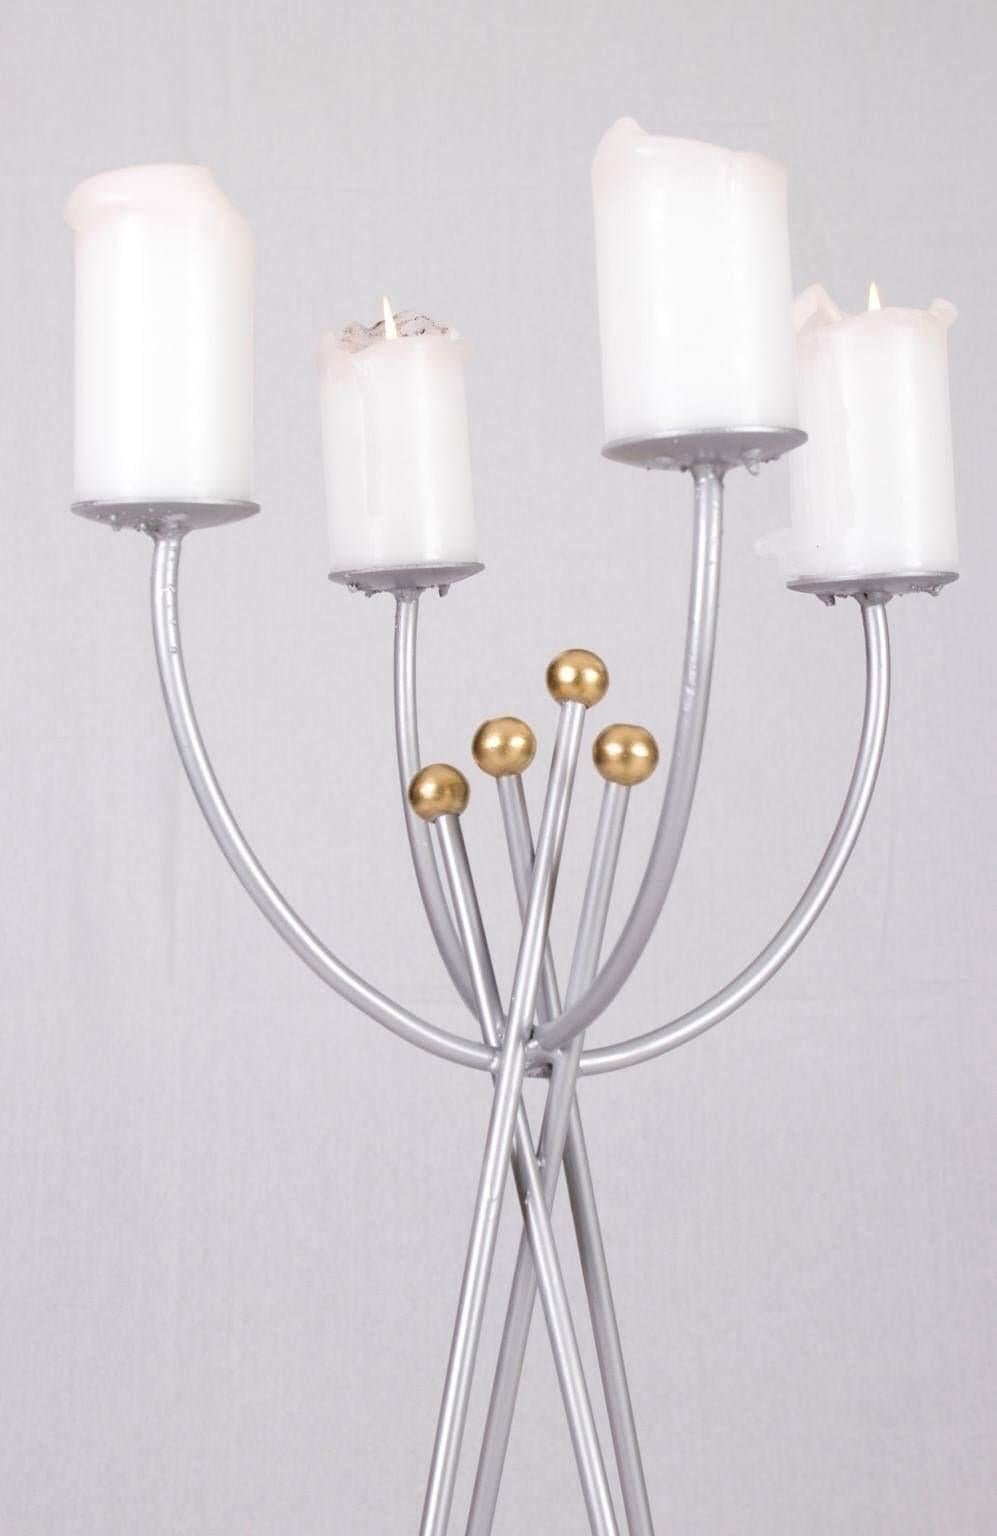 Anodized Art Deco Metal Candlestick with Gold-Plated Spheres For Sale